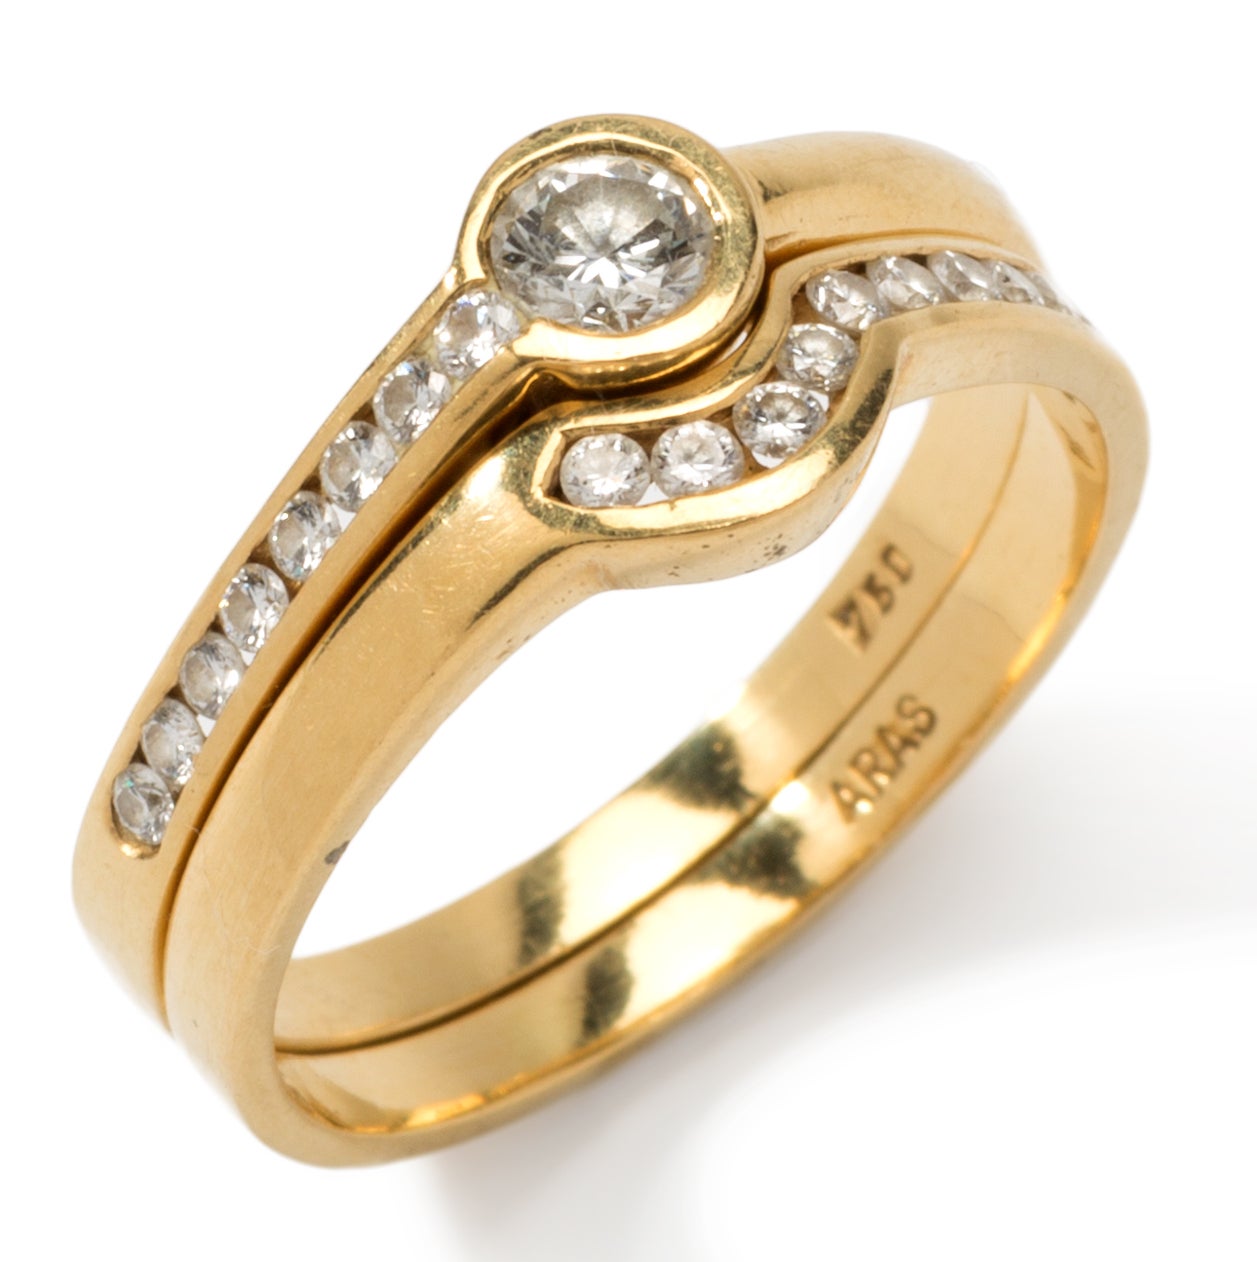 Set of two rings: 21 brilliant-cut diamonds weighing ca. 0,46 ct. Mounted in 18K yellow gold. Hallmarked with ARAS 750. Total weight: 4,03 g. Ring size: 52 ( US 5 3/4 ). Resizable